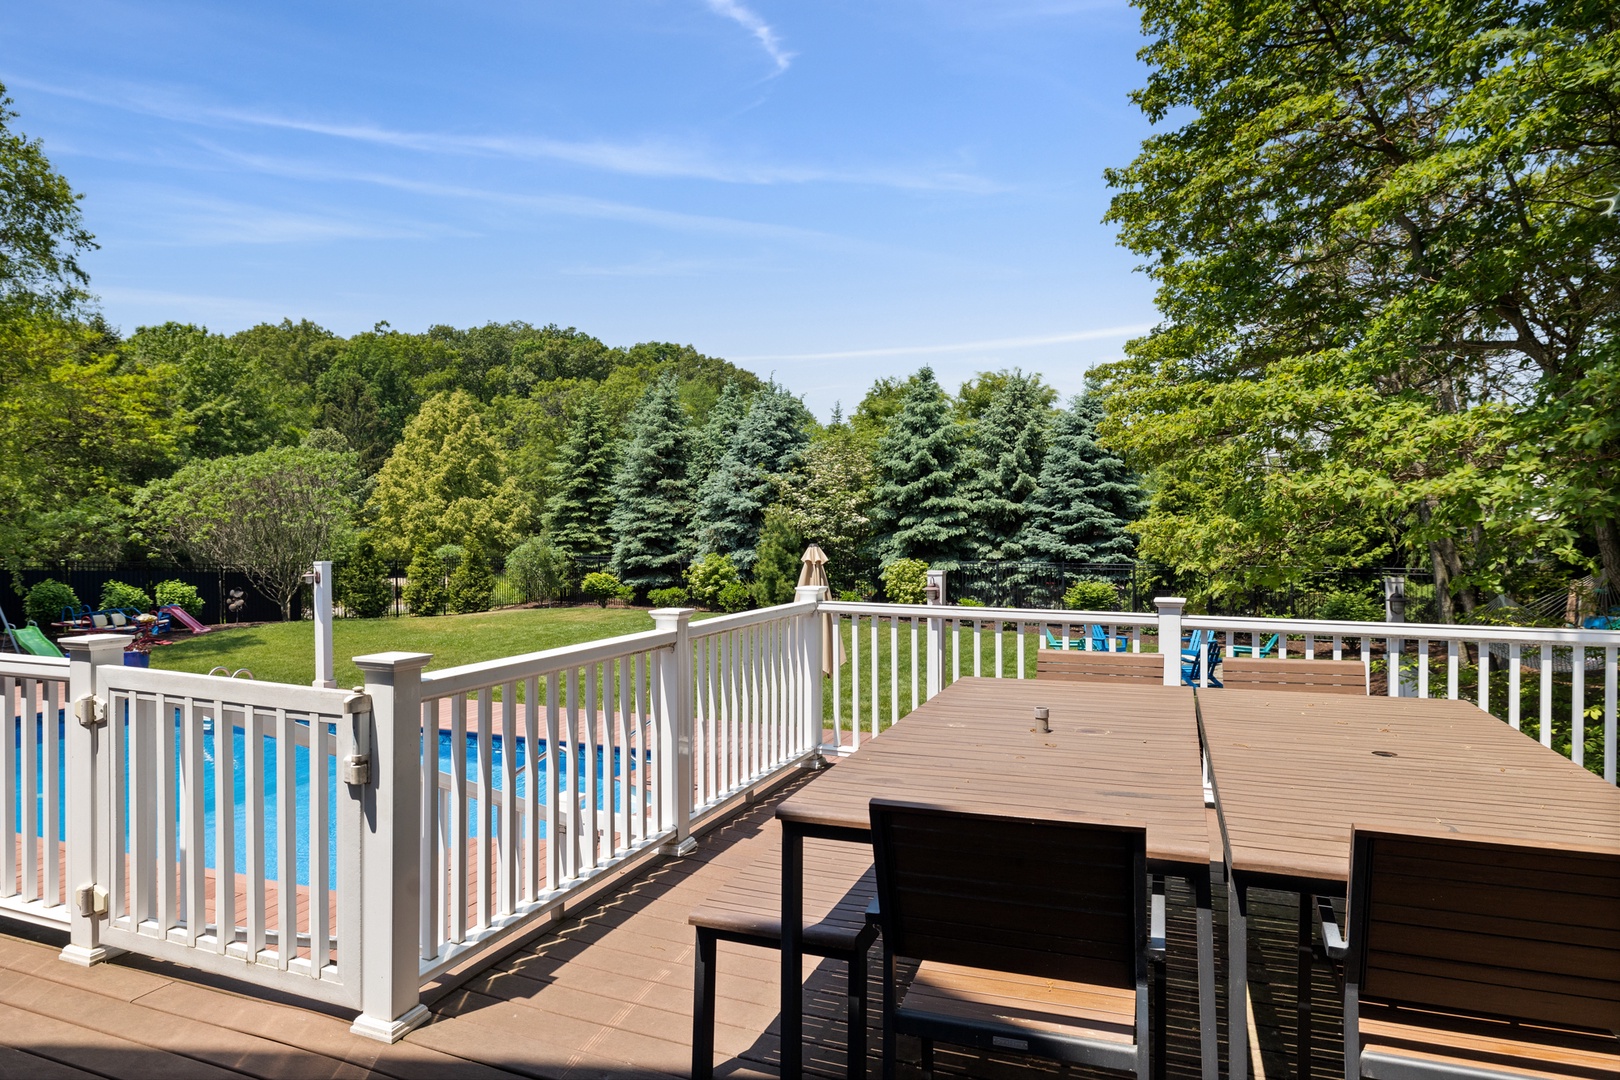 Enjoy the beautiful Michigan weather while dining al fresco on the deck.